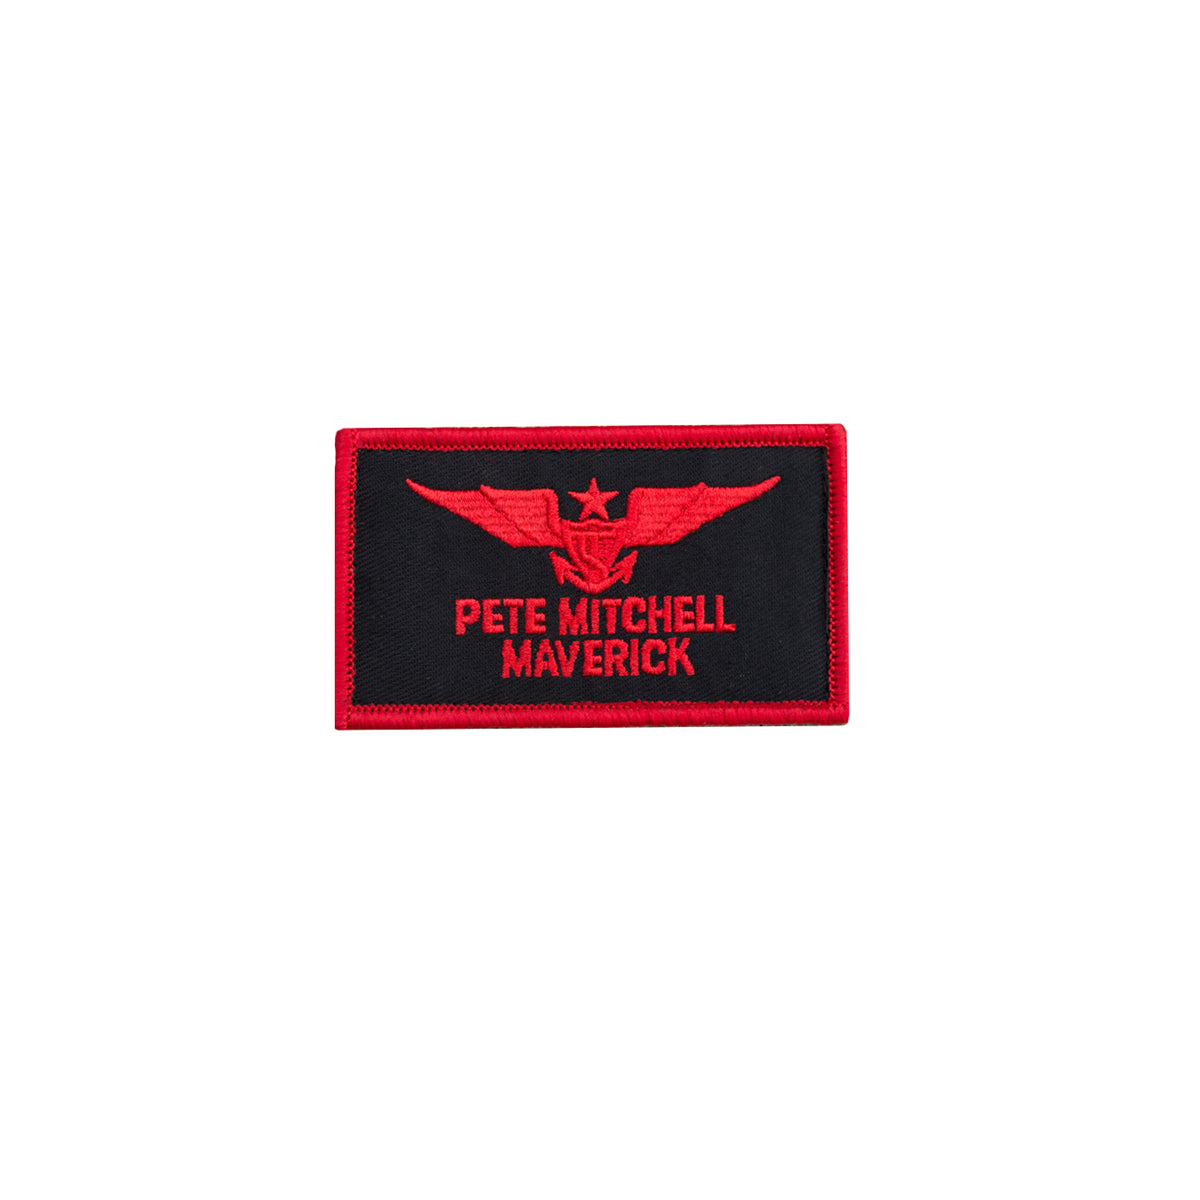 TOP GUN FLIGHT SUIT NAME TAG EMBROIDERED PATCH YOUR NAME - Wizard Patch